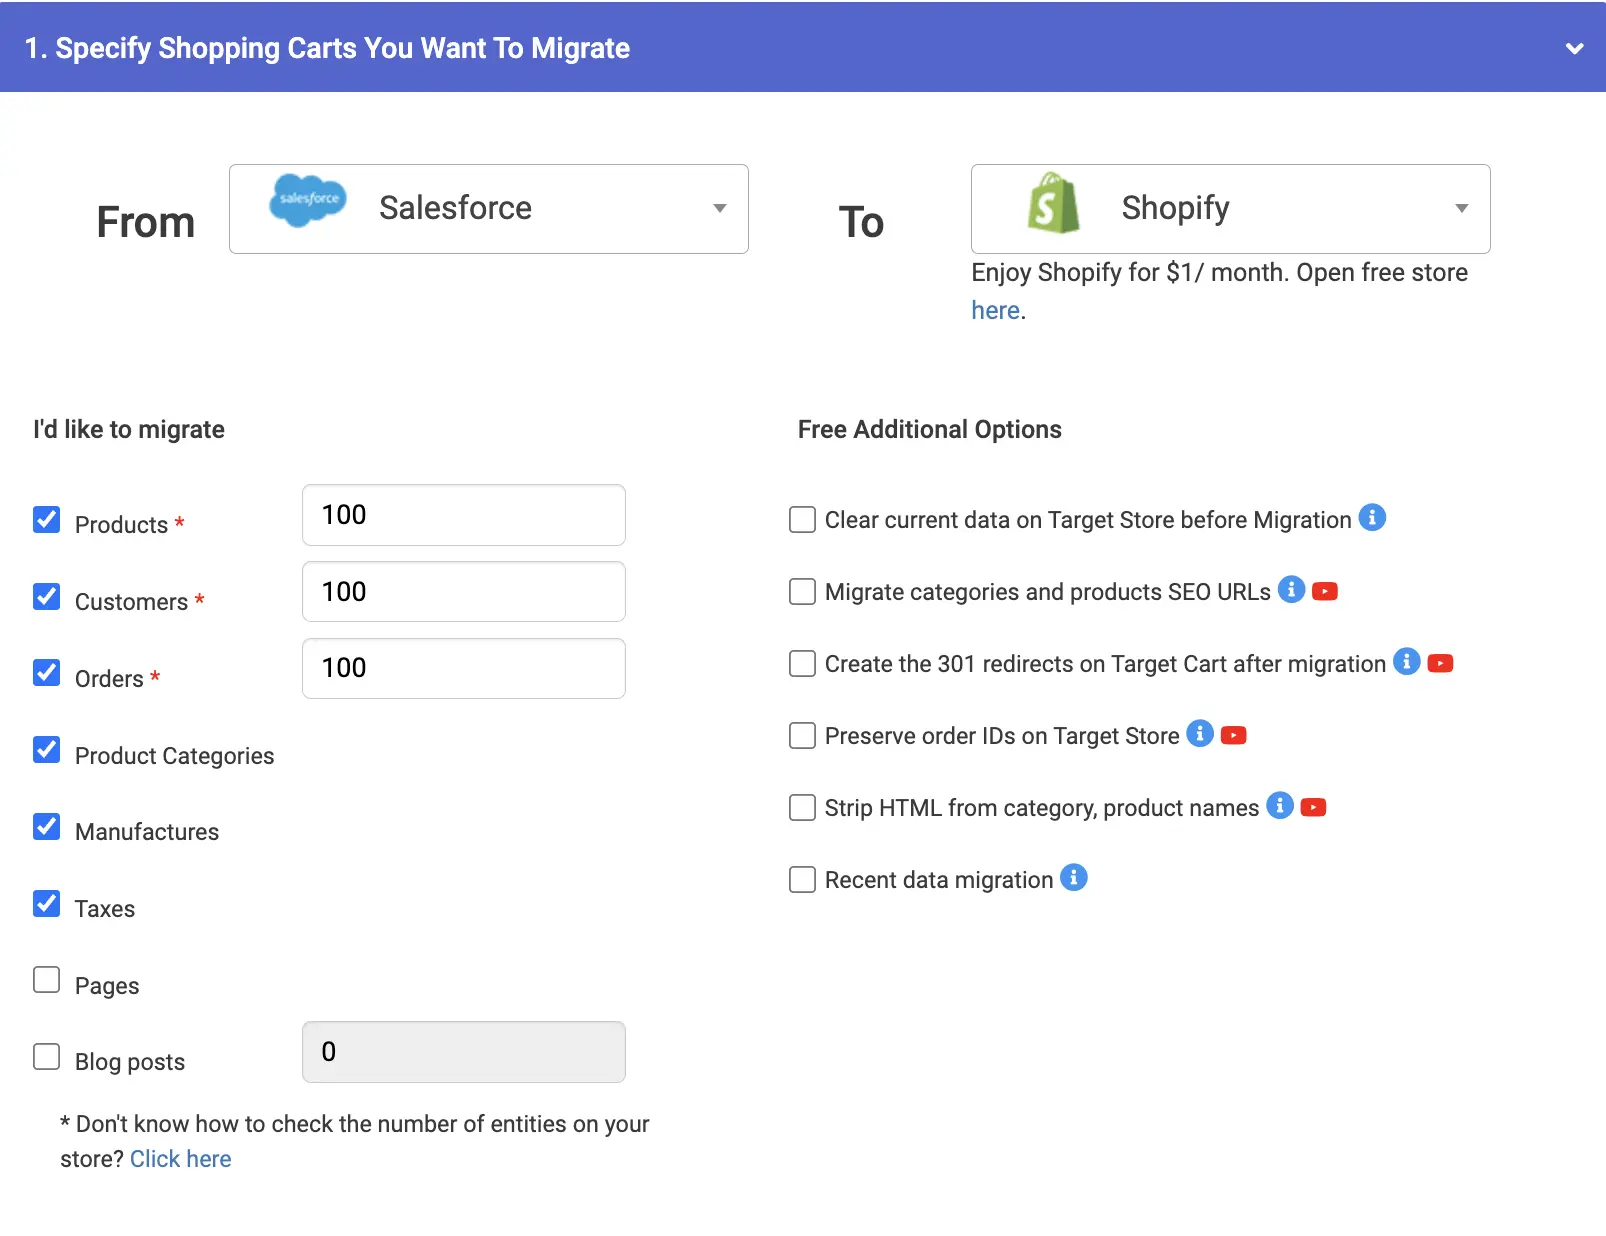 Choose the entities you want to migrate from Salesforce to Shopify Plus